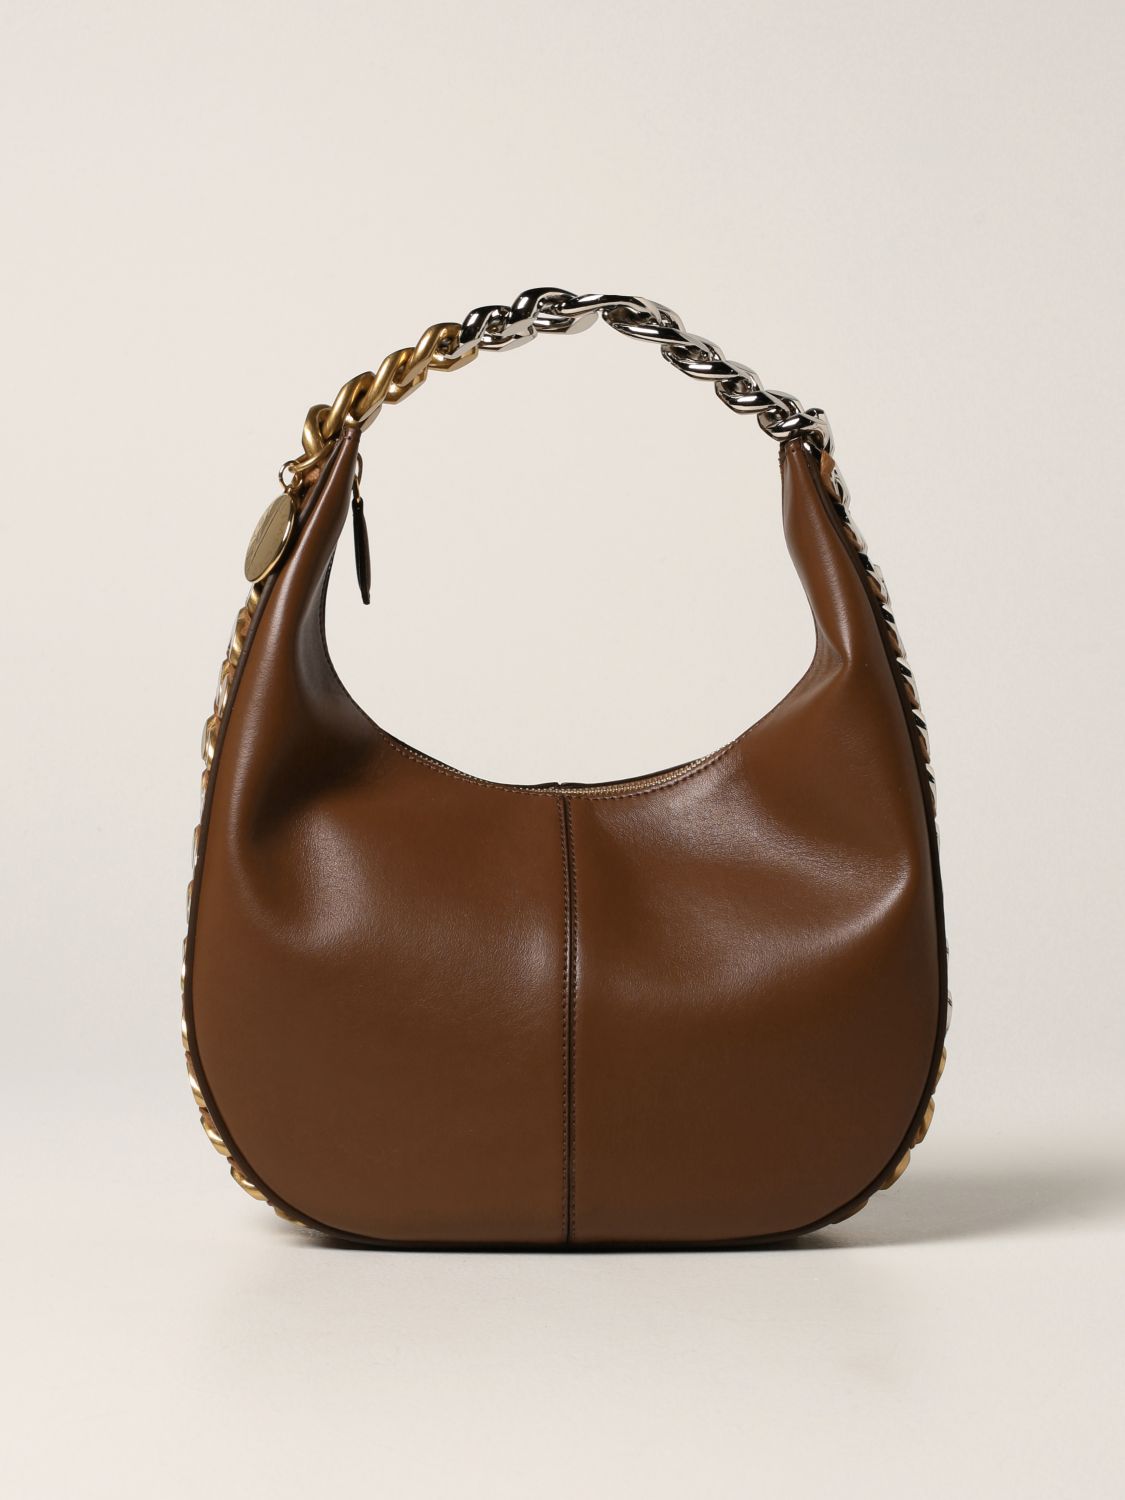 STELLA MCCARTNEY: Frayme bag with chains | Shoulder Bag Mccartney Camel | Bag Mccartney 700272W8839 GIGLIO.COM